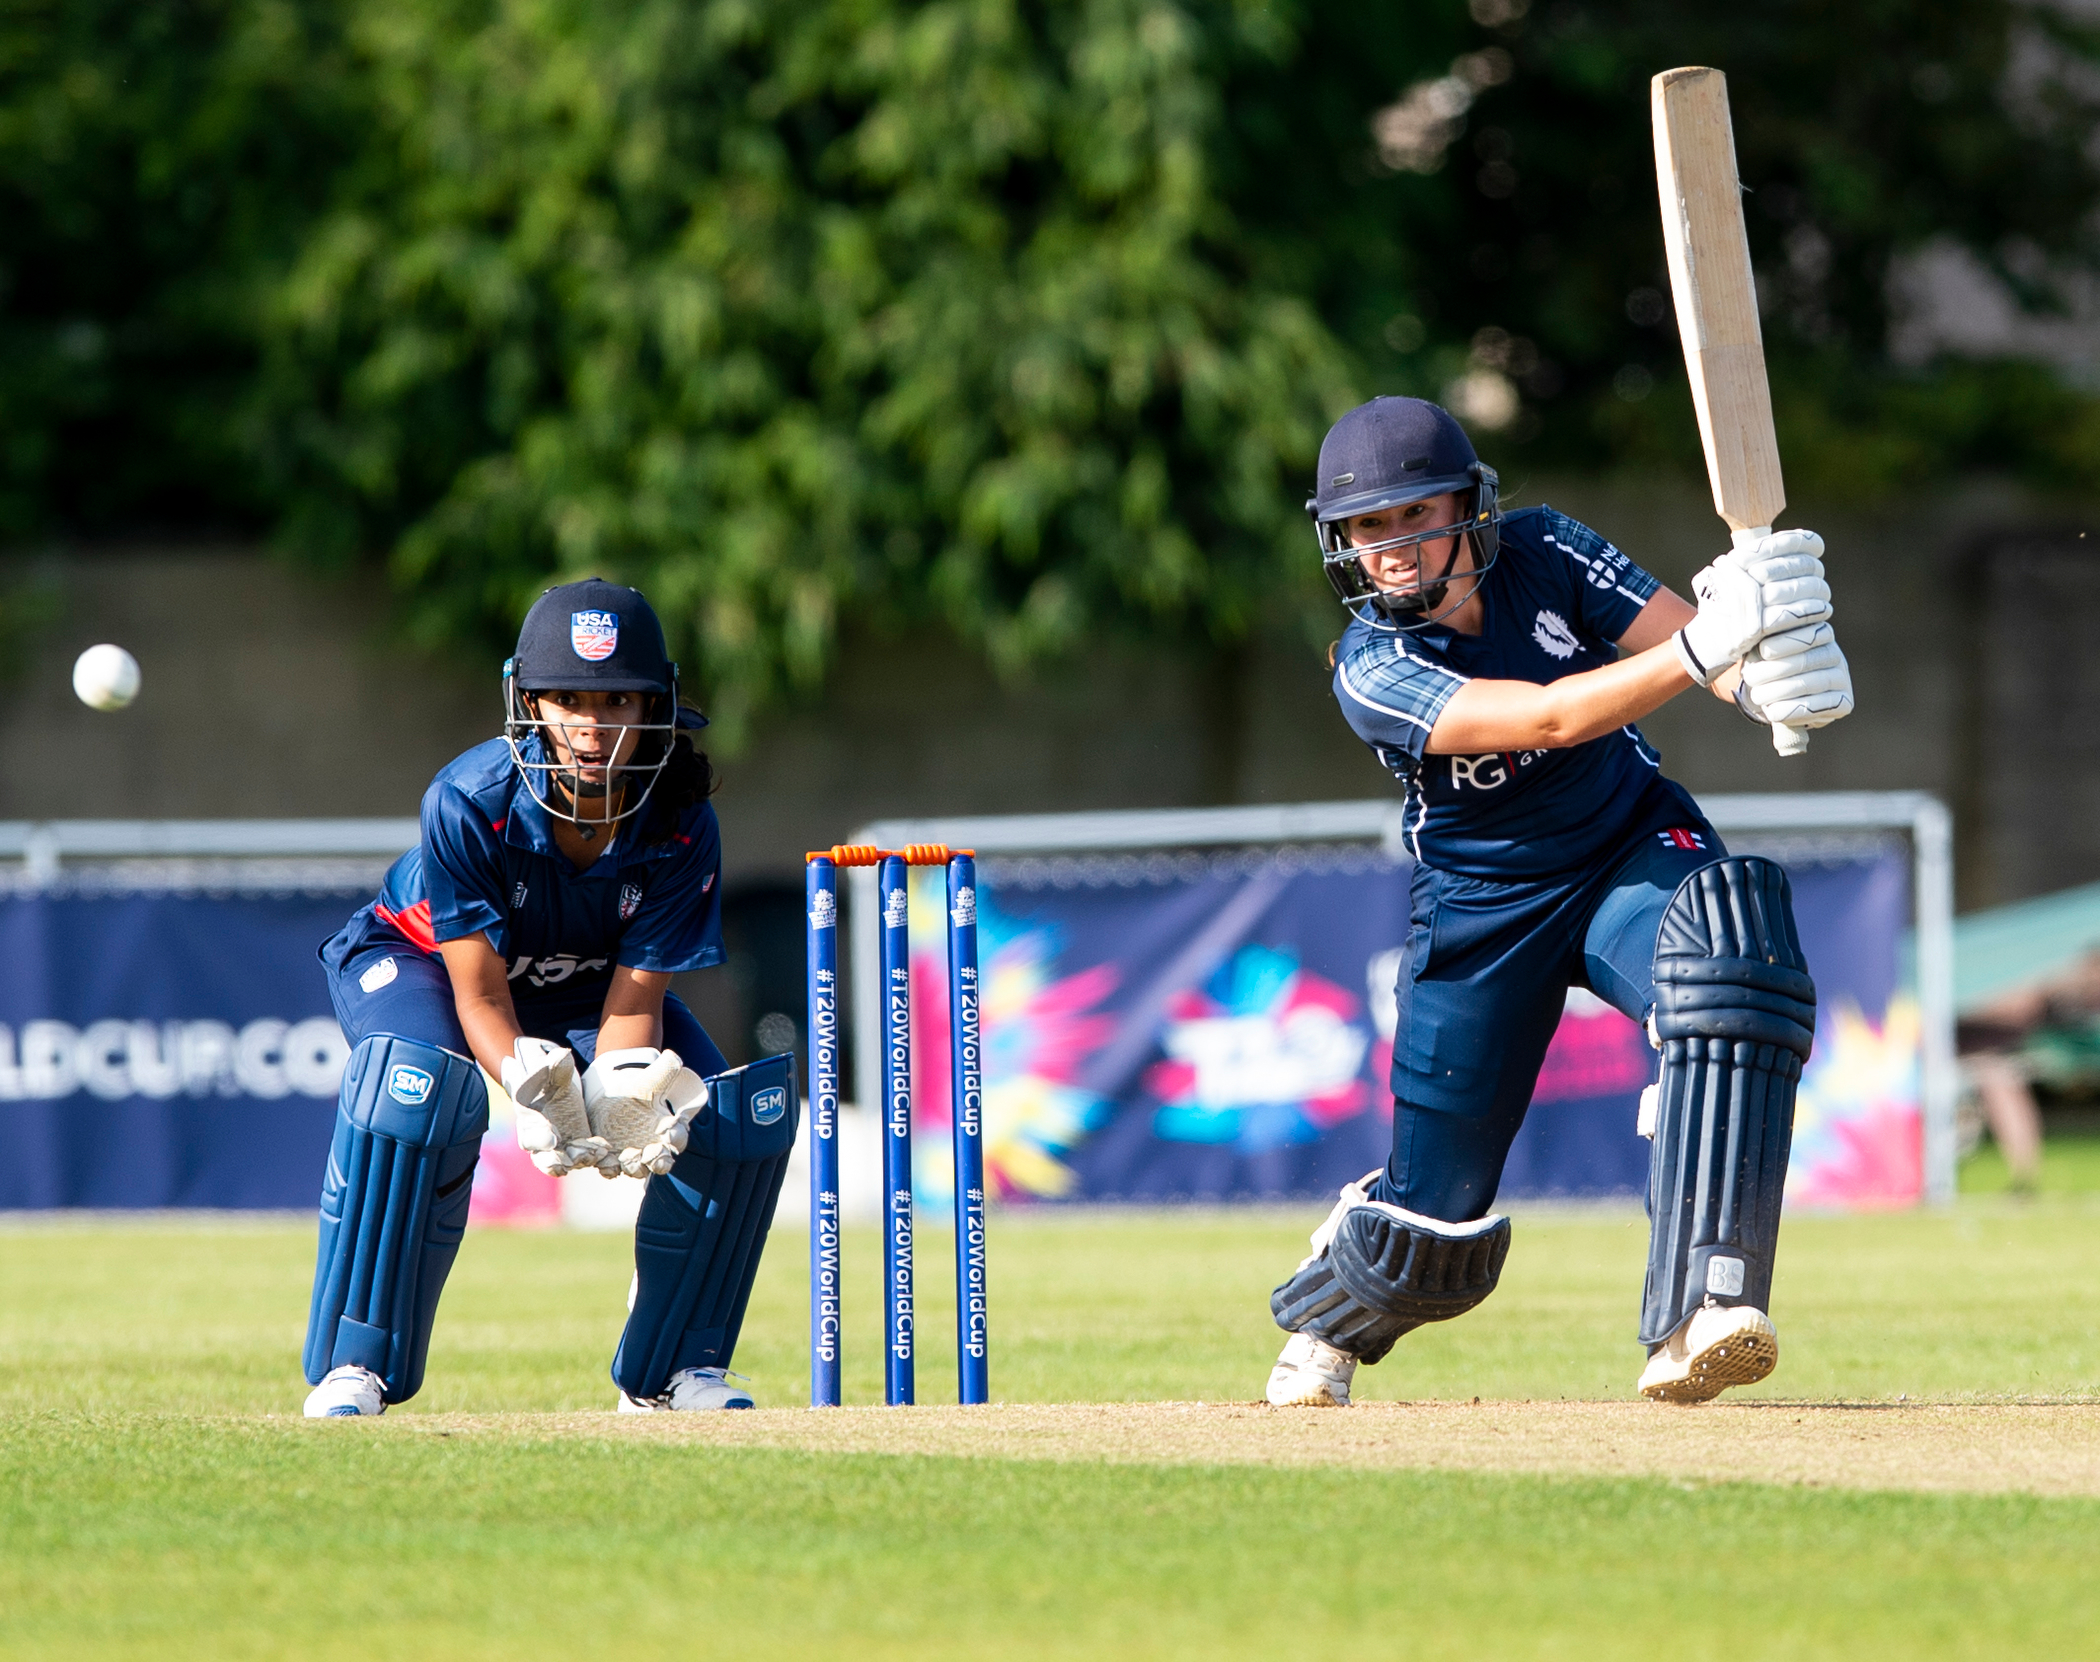 Scotland to Host Two ICC European Qualifiers